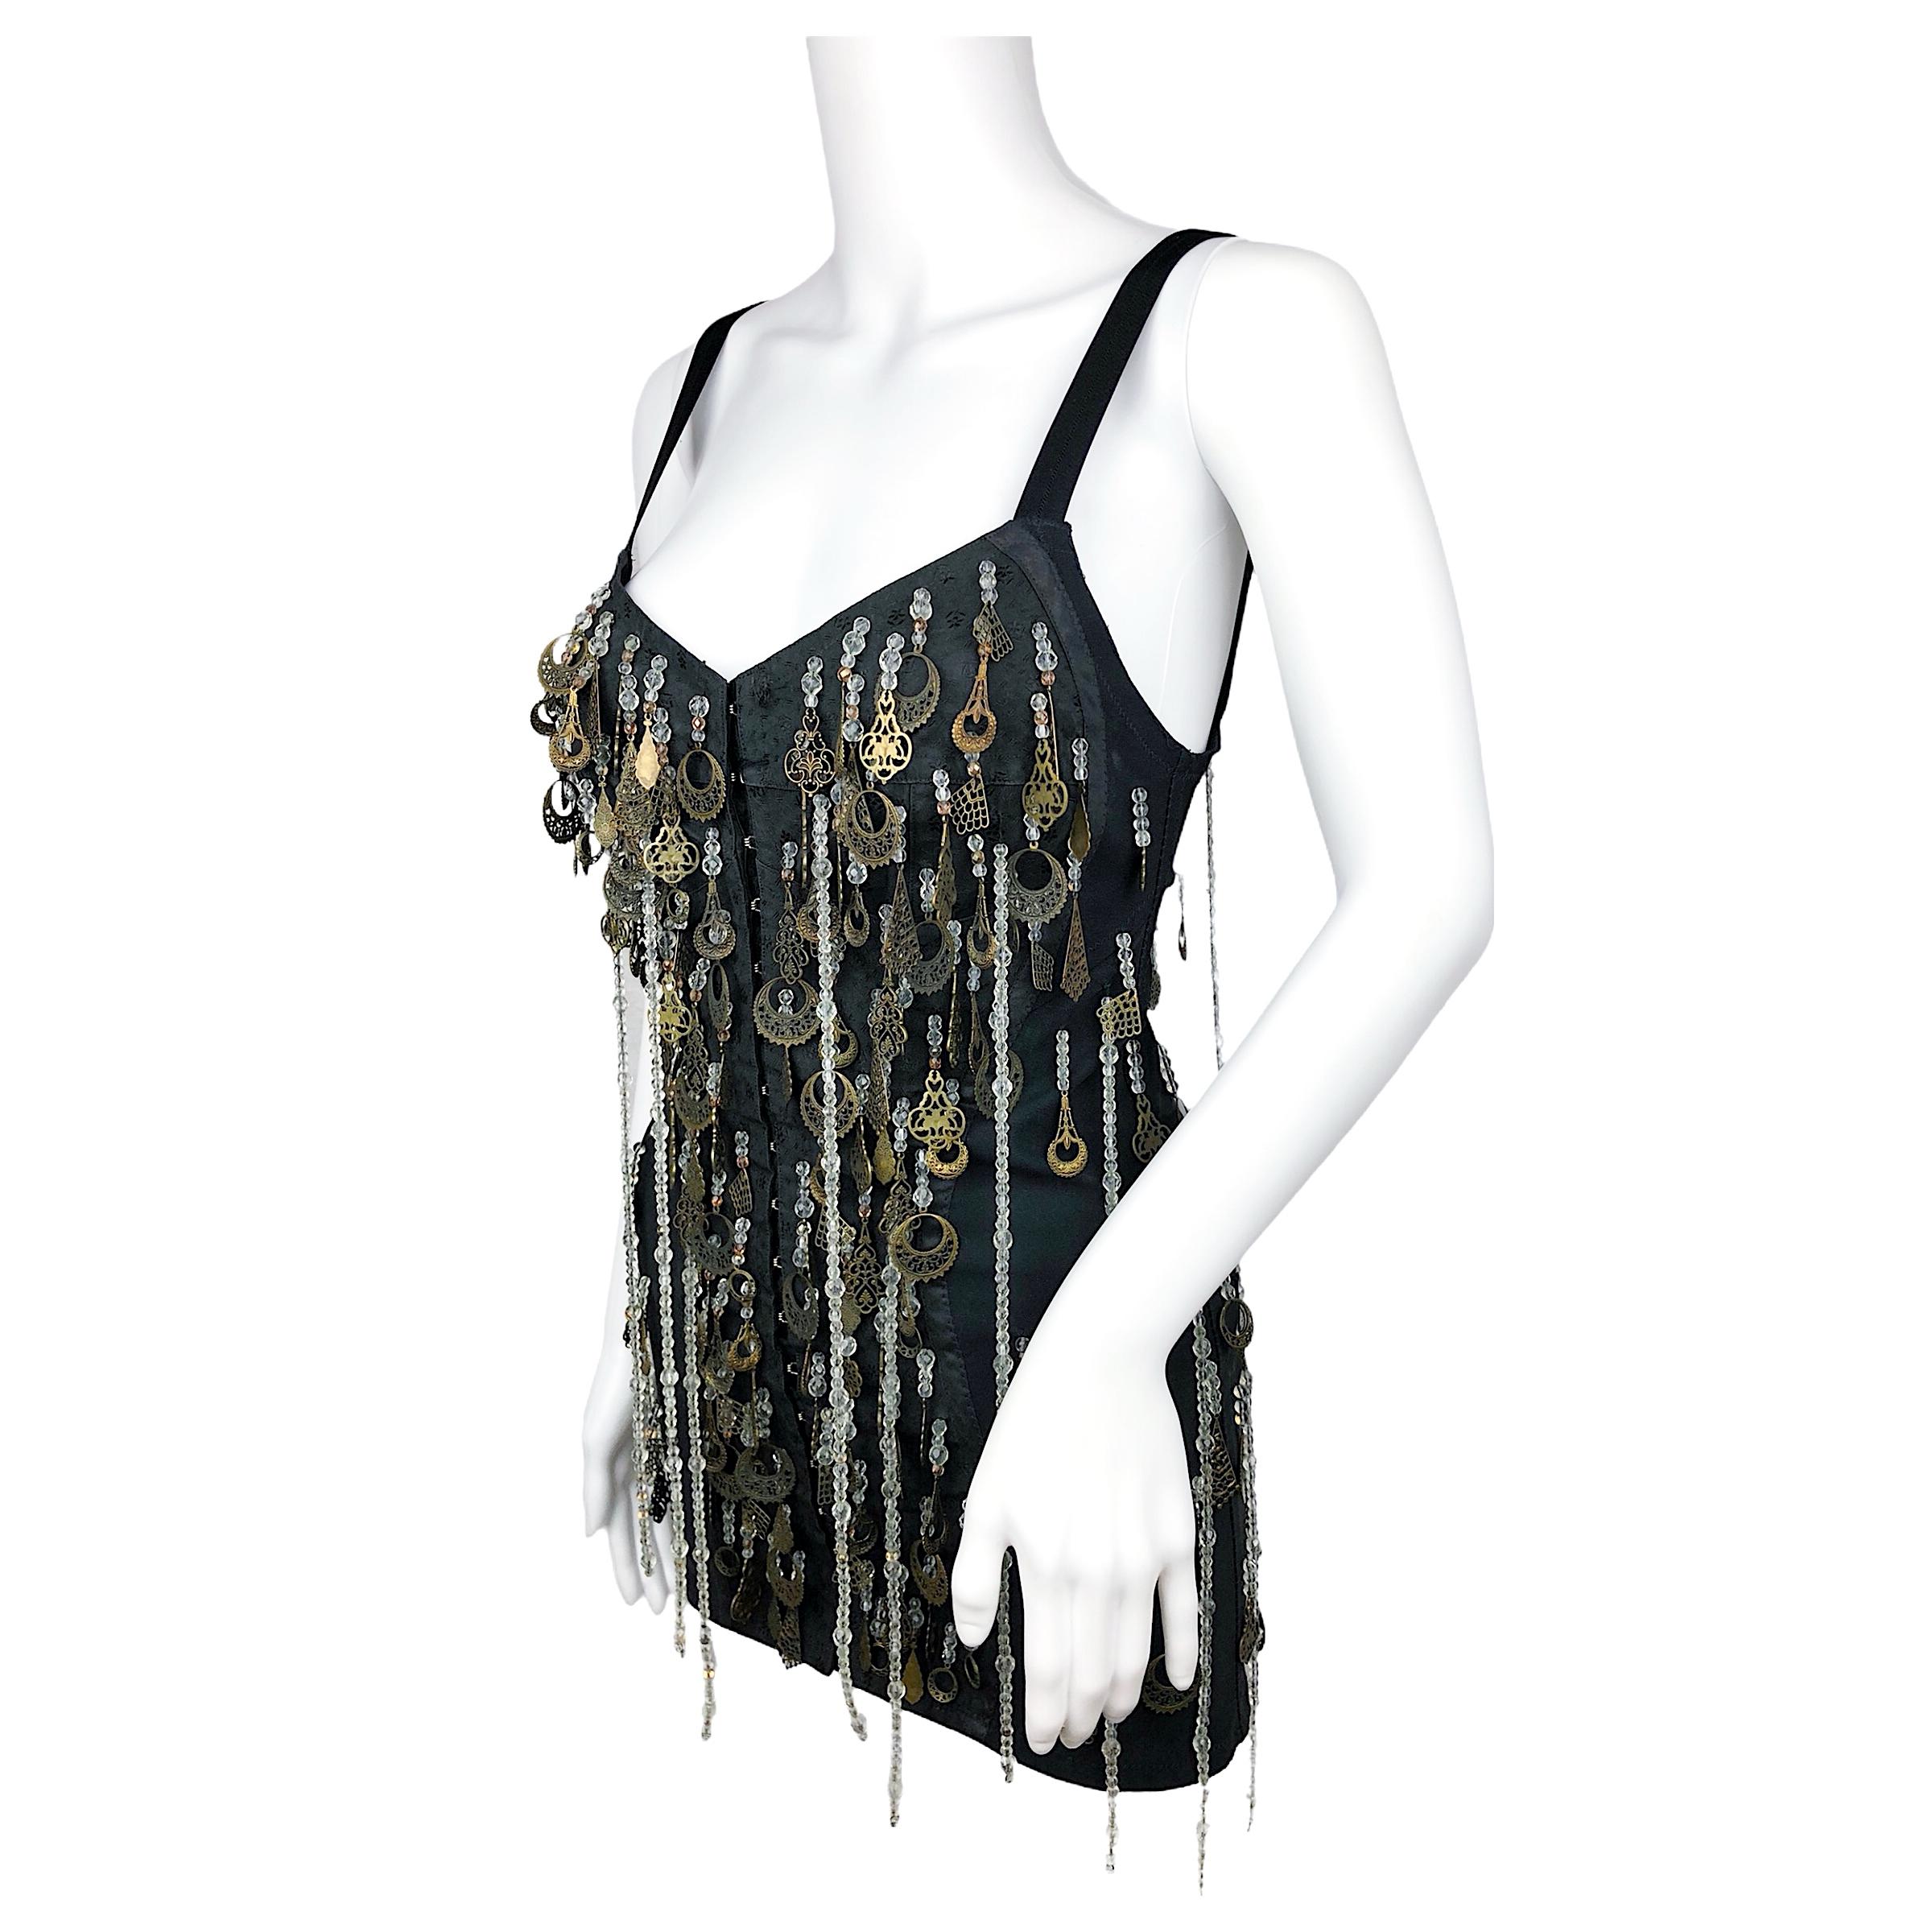 Incredible Dolce & Gabbana long corset with pearls fringes and embellishment from Fall Winter 1990 collection. Size is Italian 44, fits like a US 6, UK 10, EU 38. 
Condition: Excellent / Flaws: Missing a few embellishments as shown in pictures 